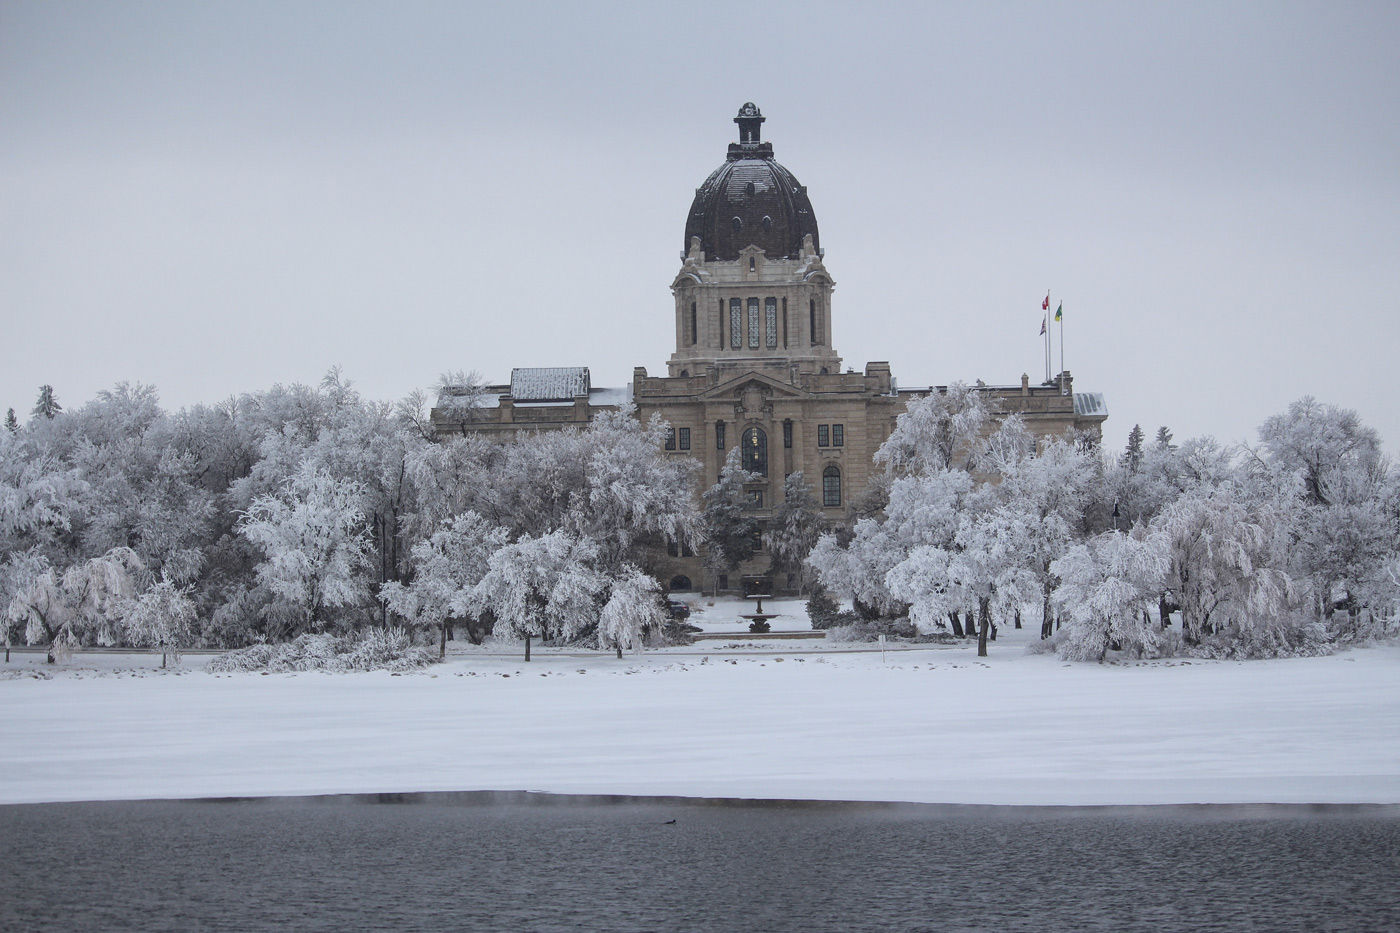 Dress warm and enjoy all there is to see in February when staying at hotels in Regina, Saskatchewan.